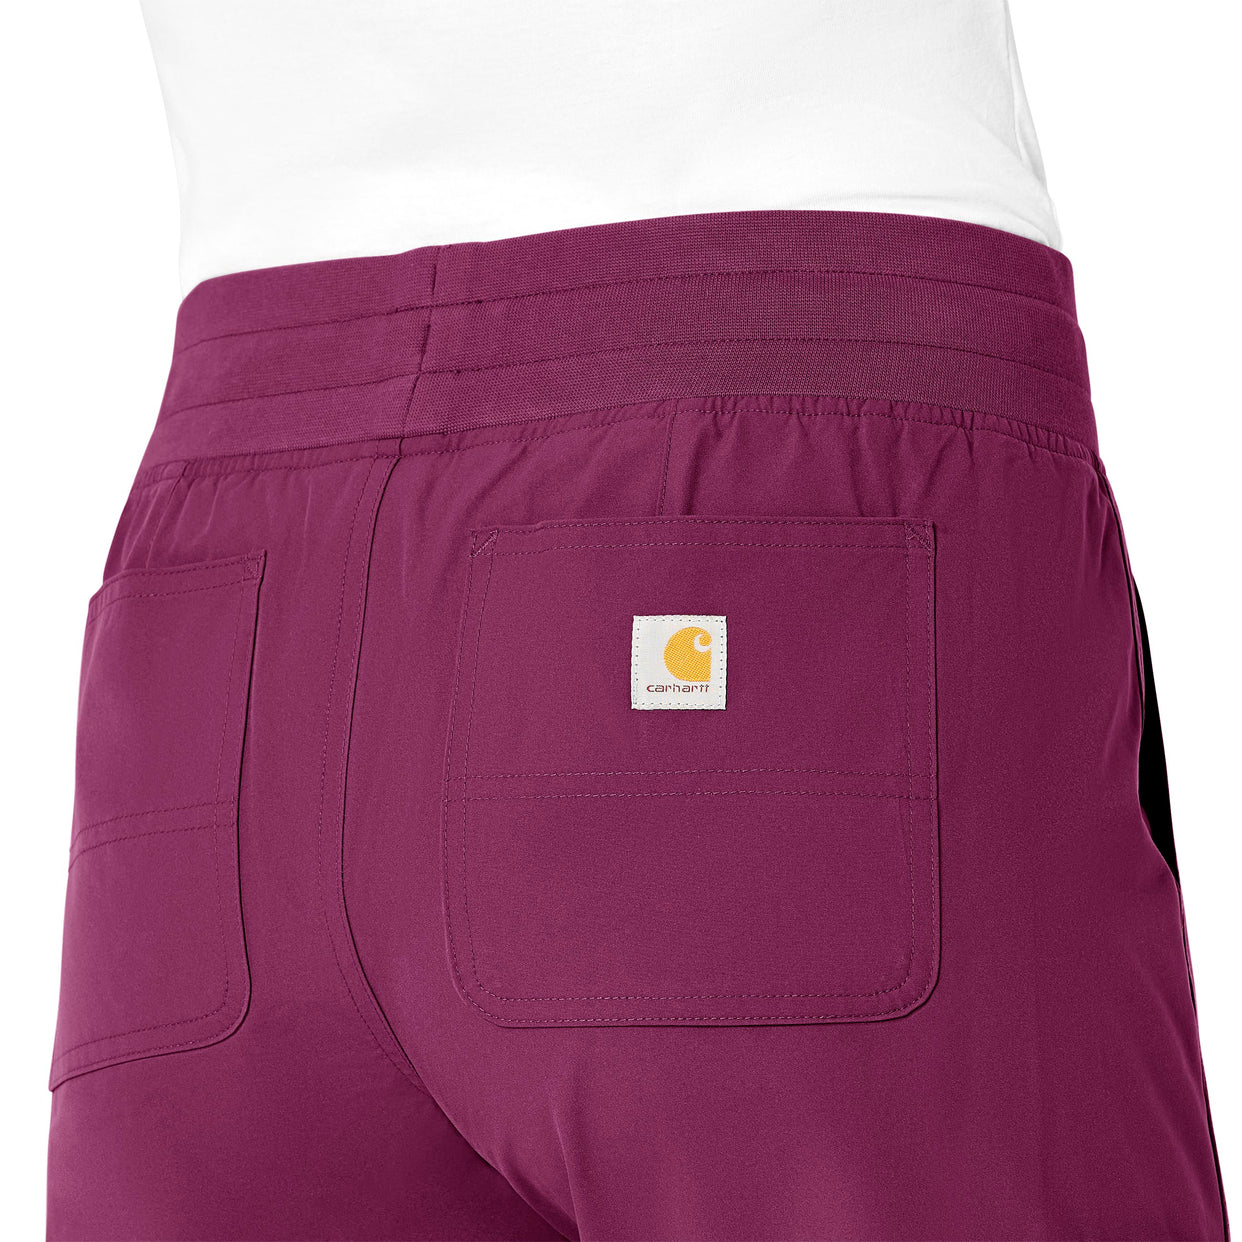 Force Essentials Women's Jogger Scrub Pant Wine side detail 1